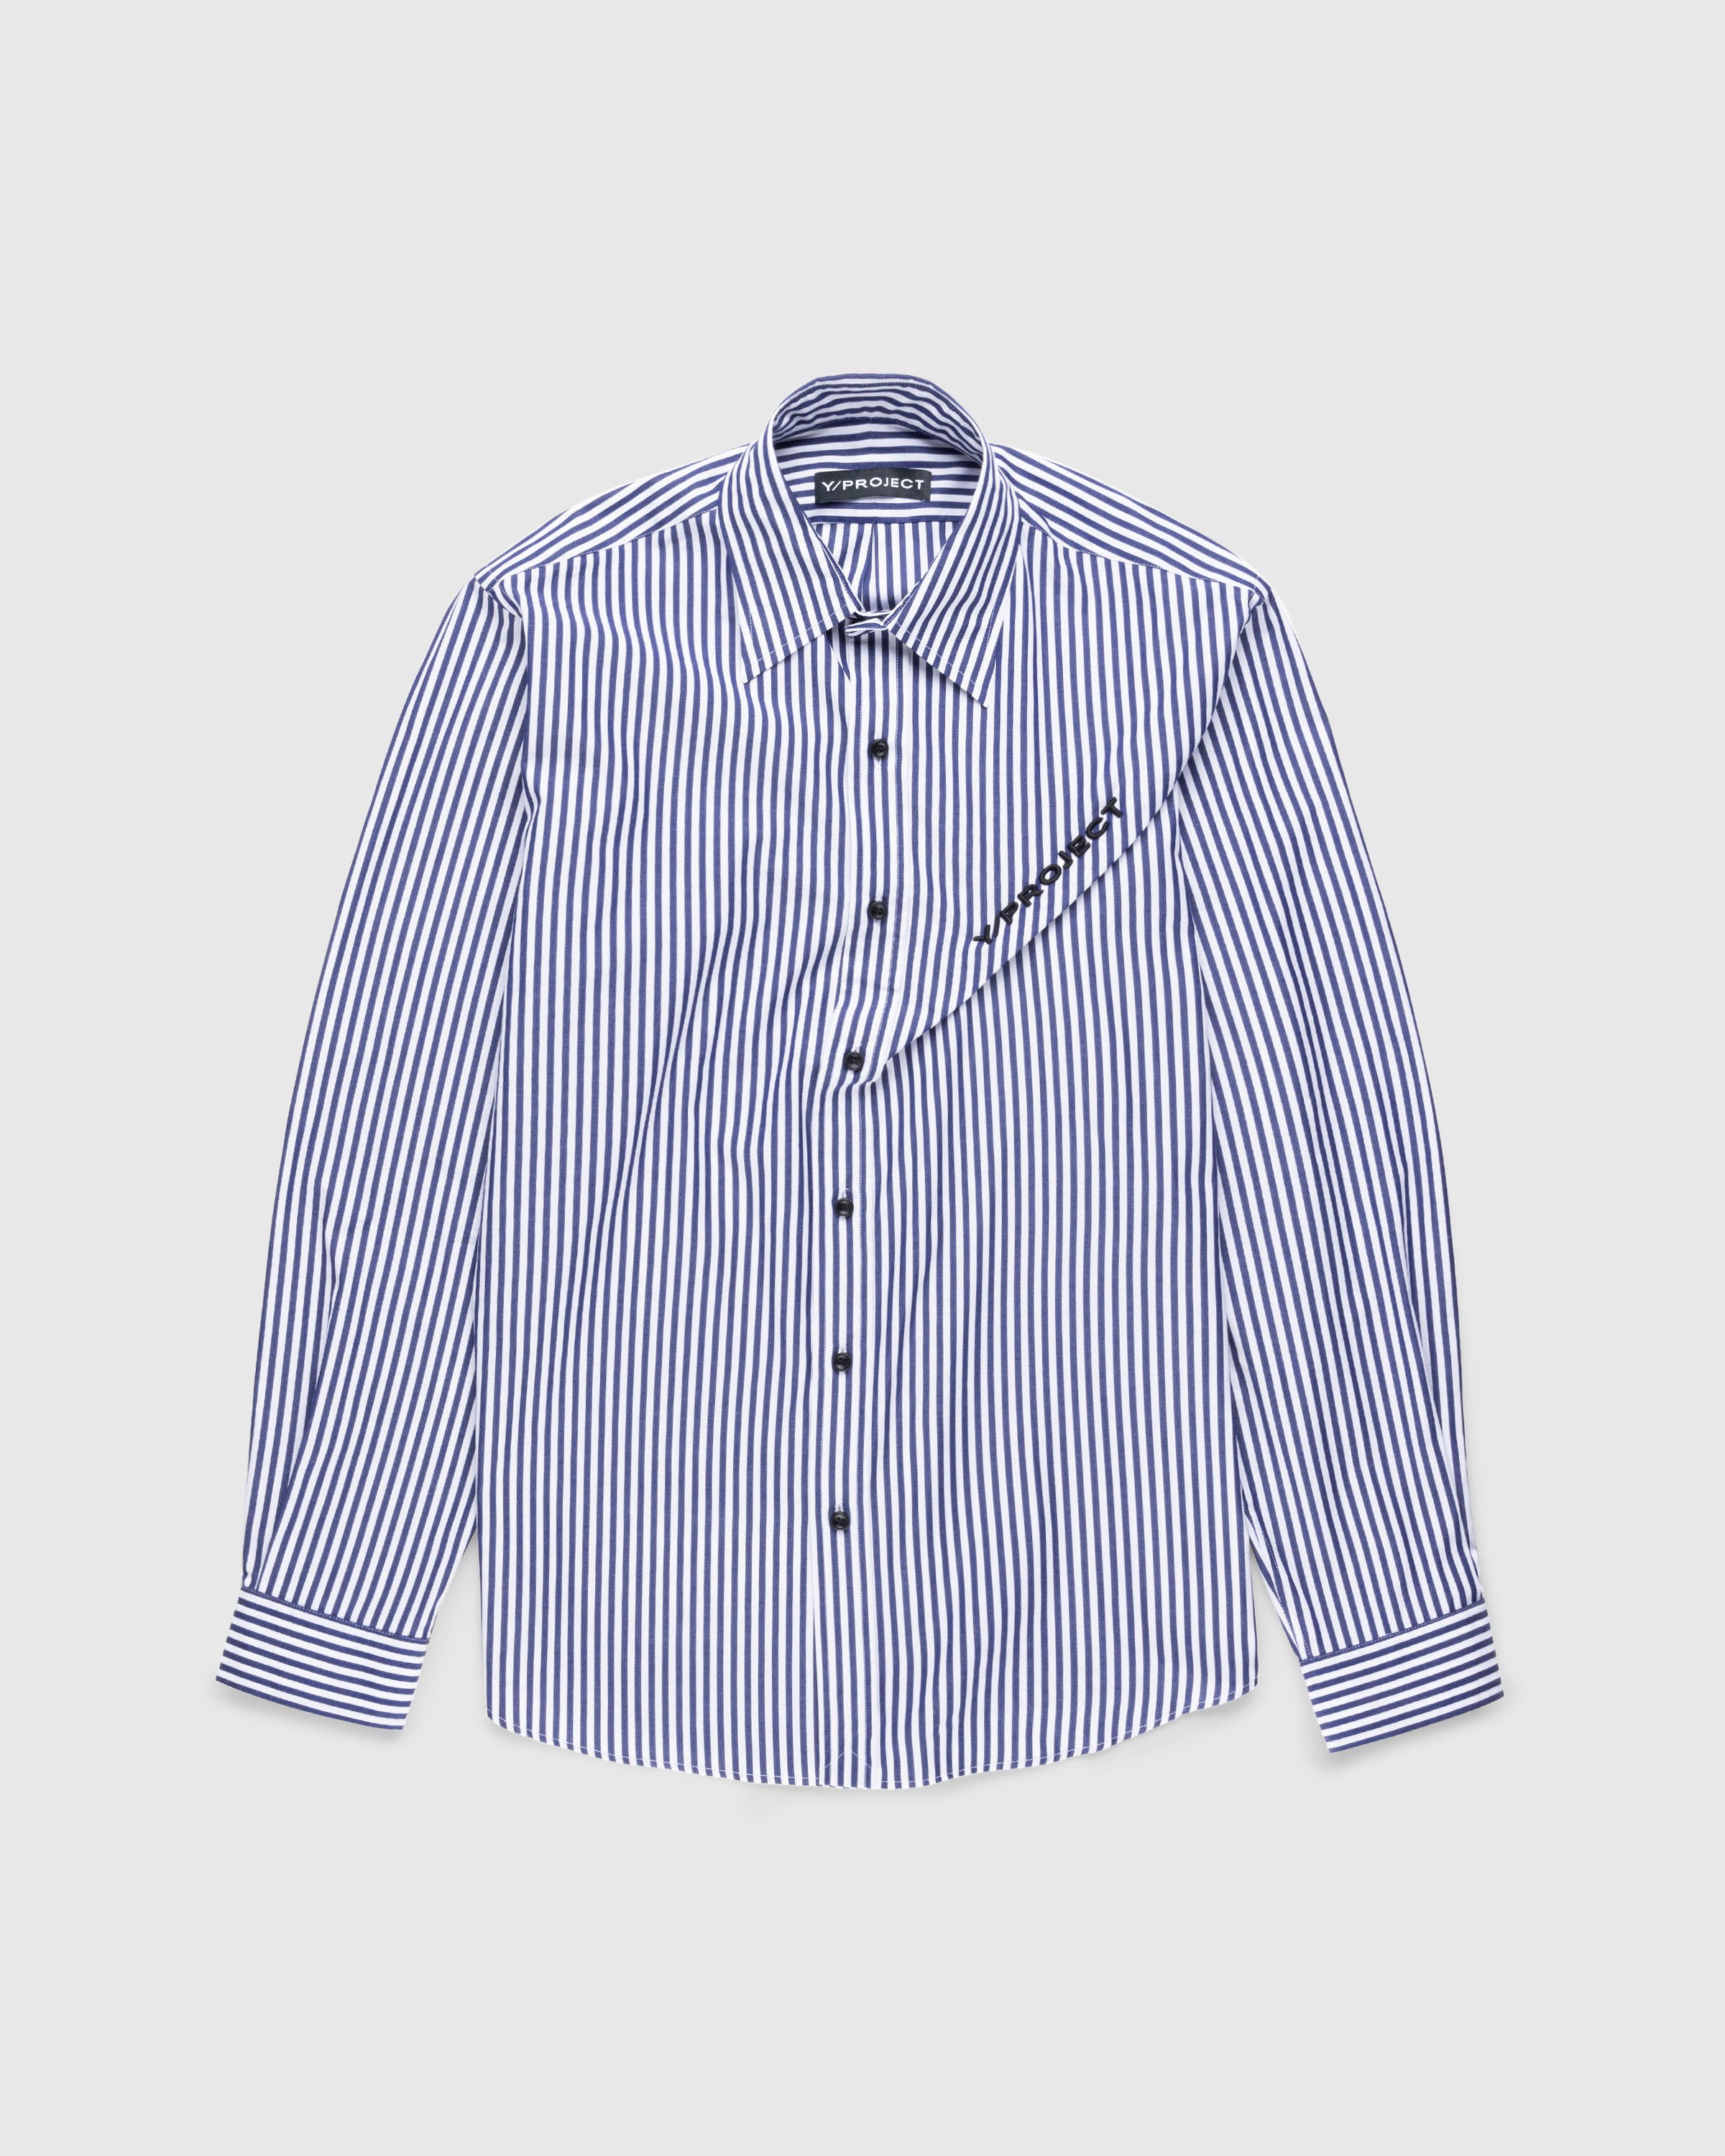 Y/Project - Pinched Logo Stripe Shirt Navy/White - Clothing - Blue - Image 1